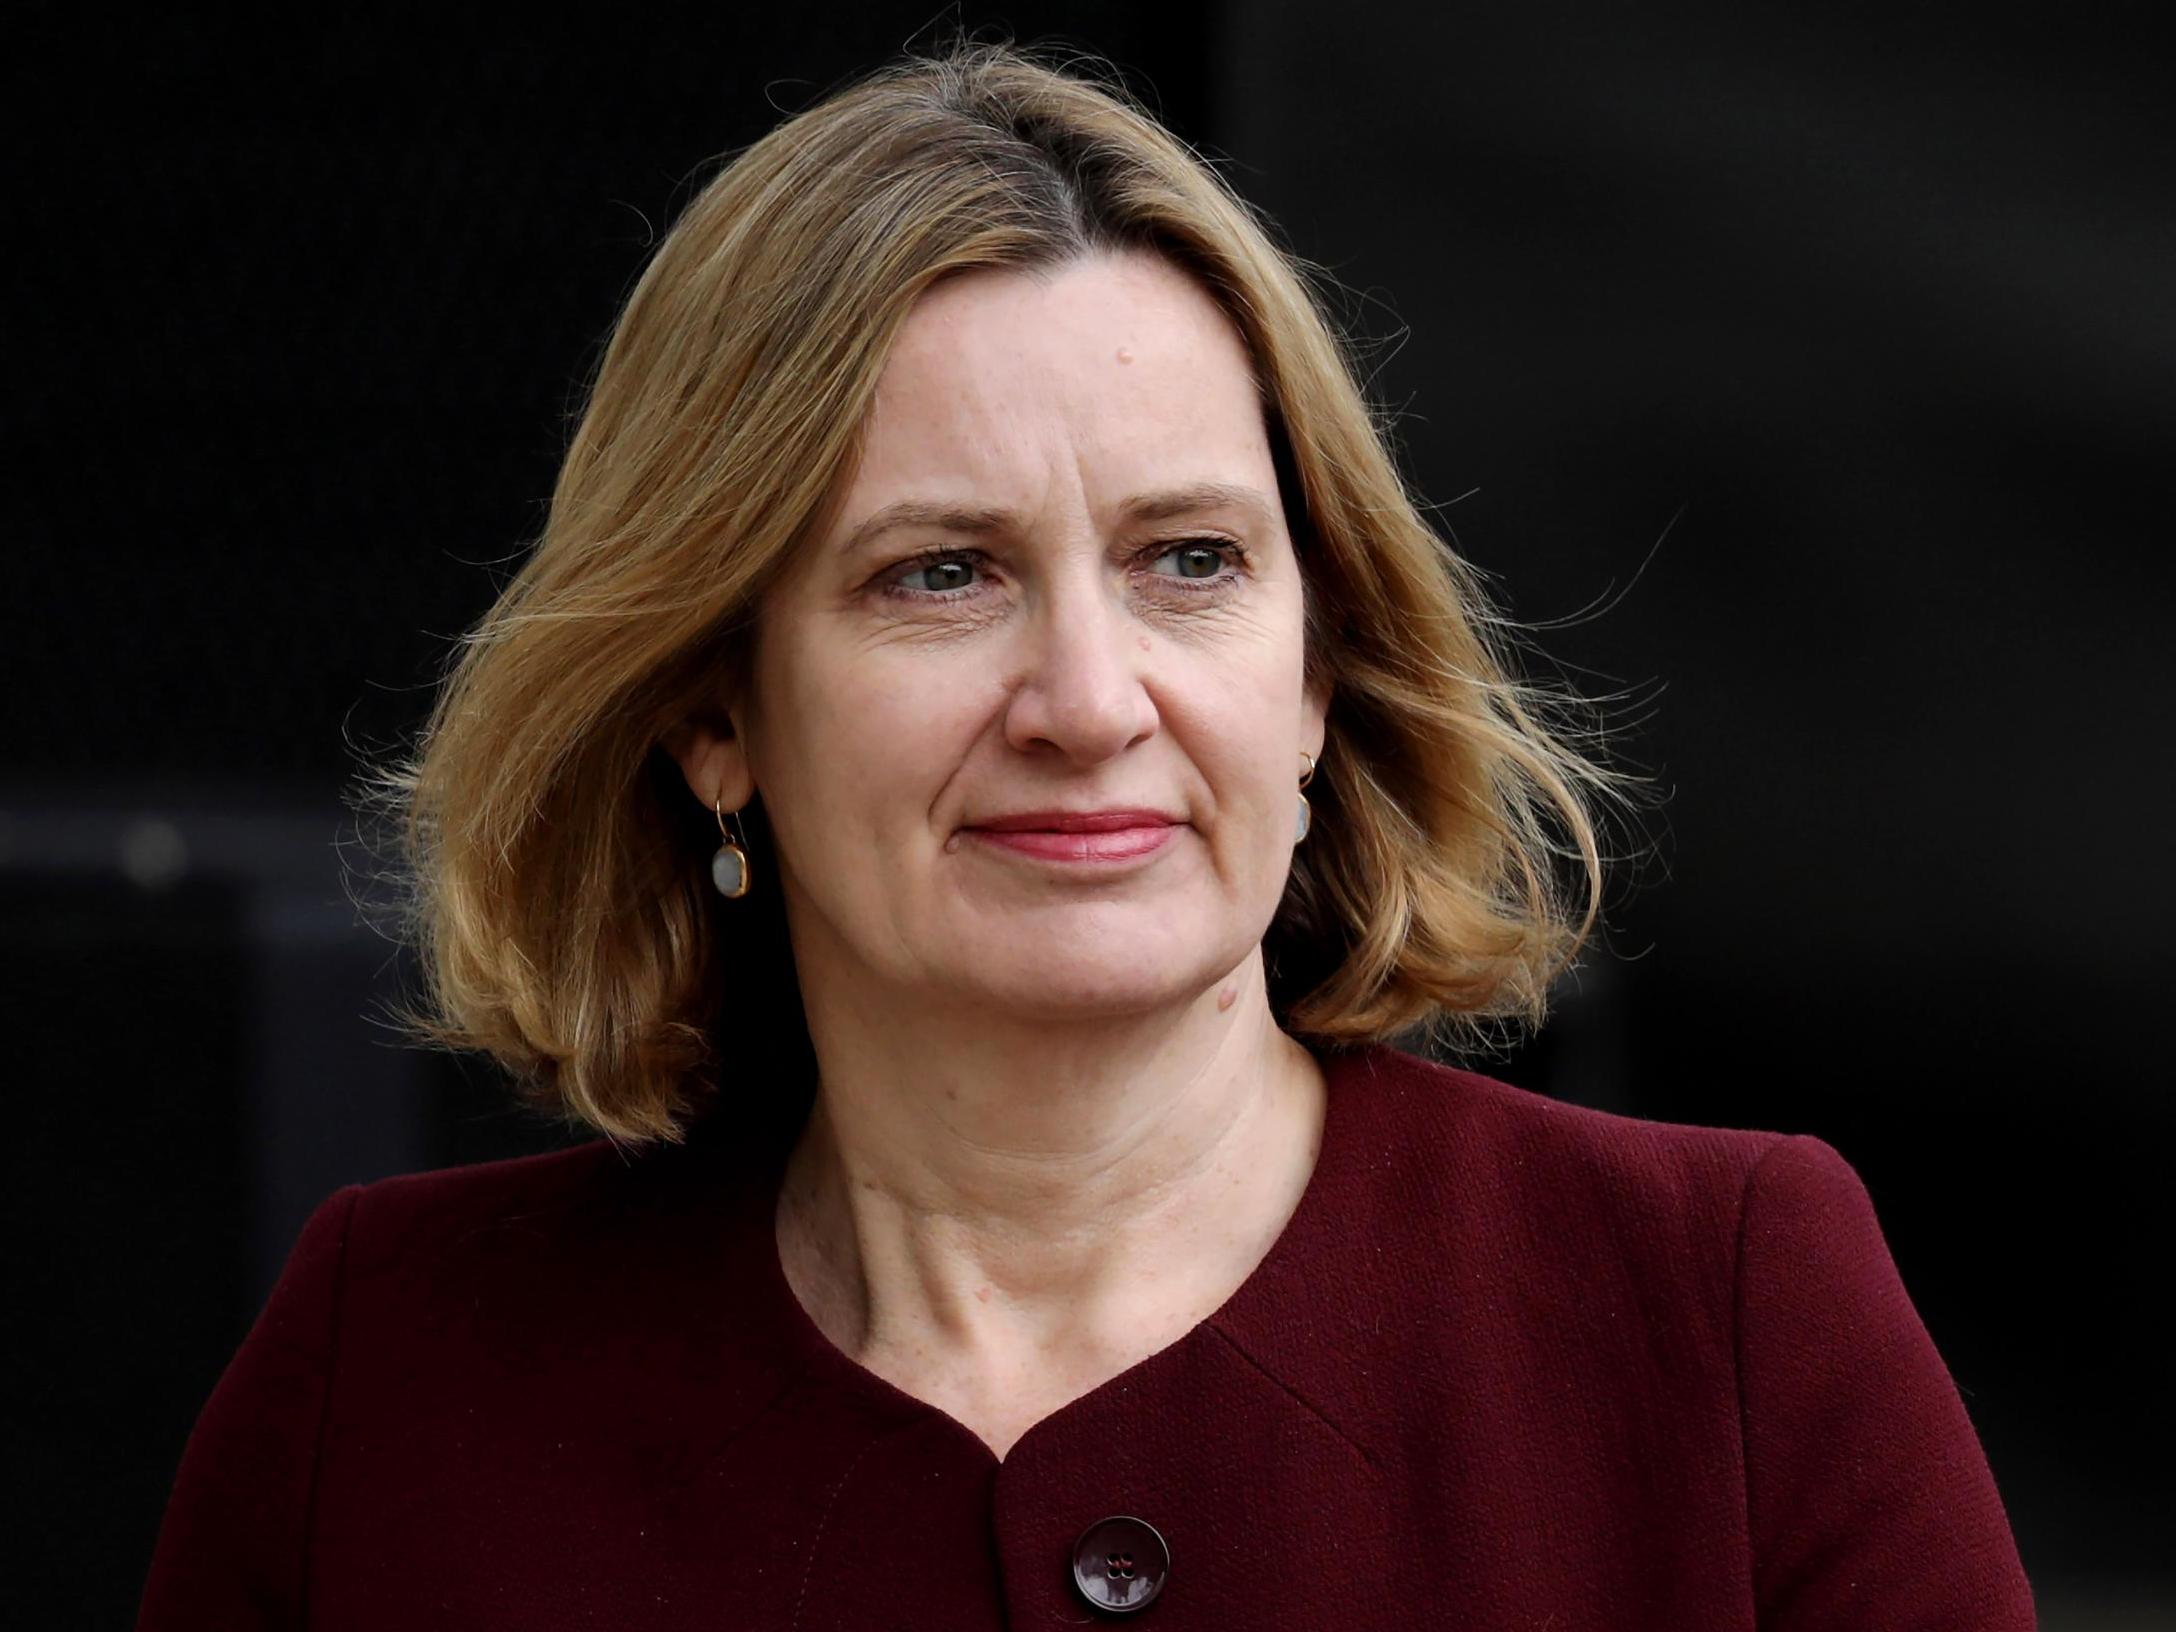 Amber Rudd has bowed to pressure over universal credit